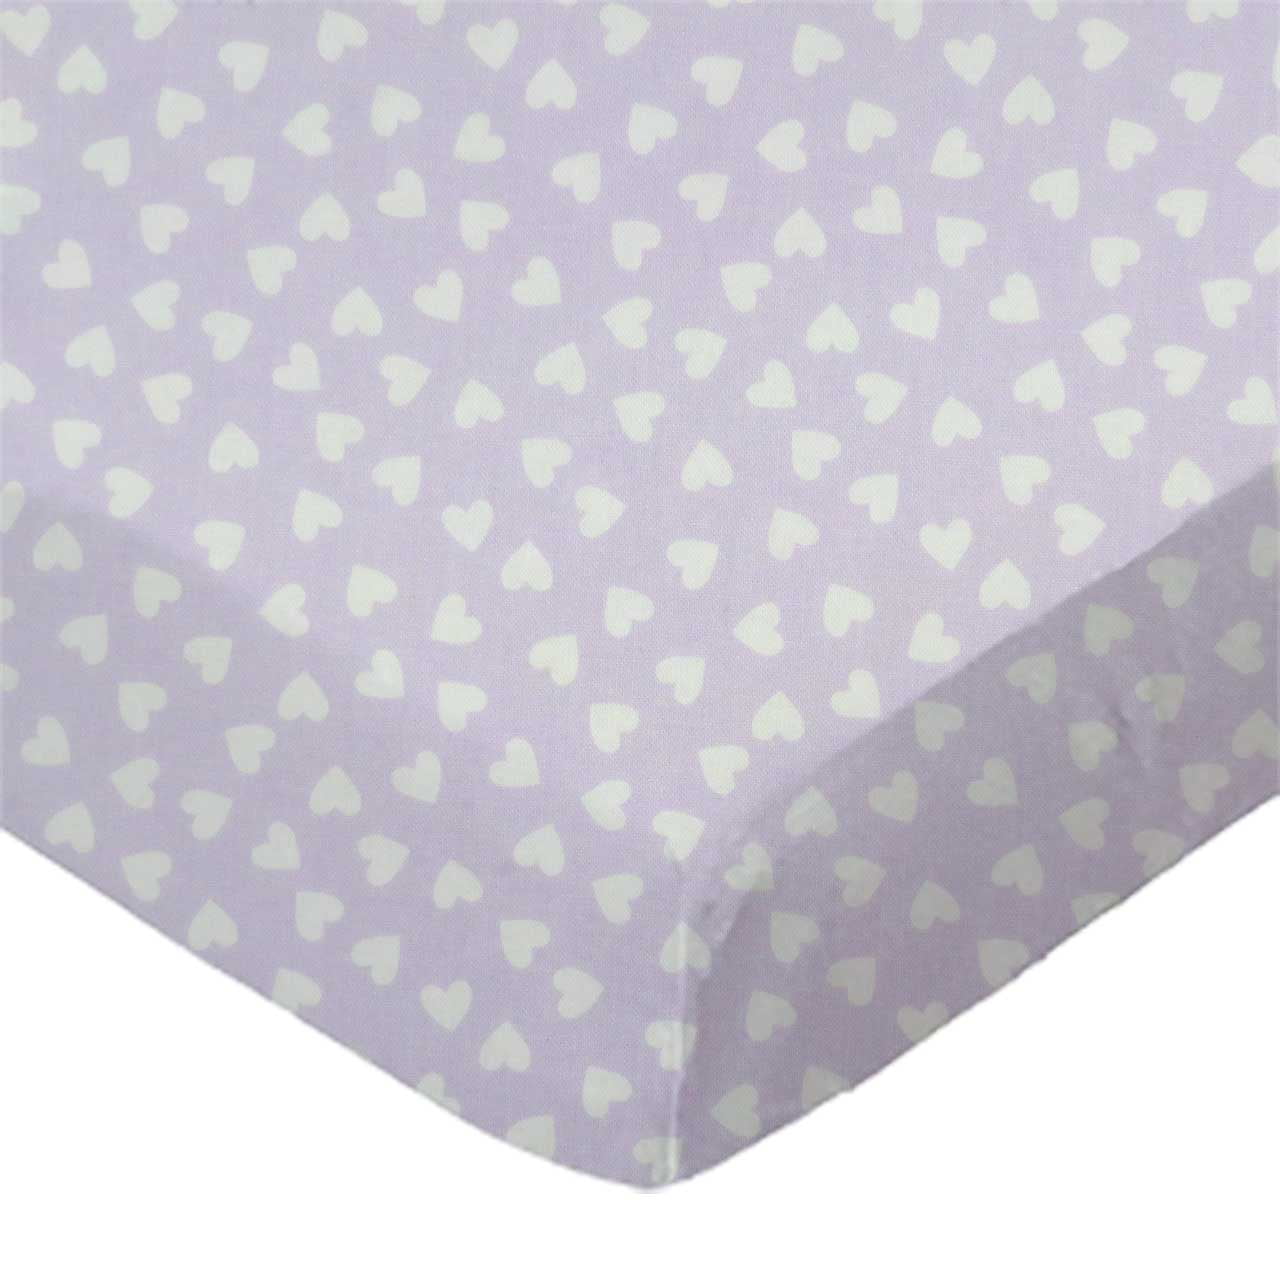 All Star Toile SheetWorld Fitted 100% Cotton Percale Pack N Play Sheet Fits Graco Square Play Yard 36 x 36 Made in USA 